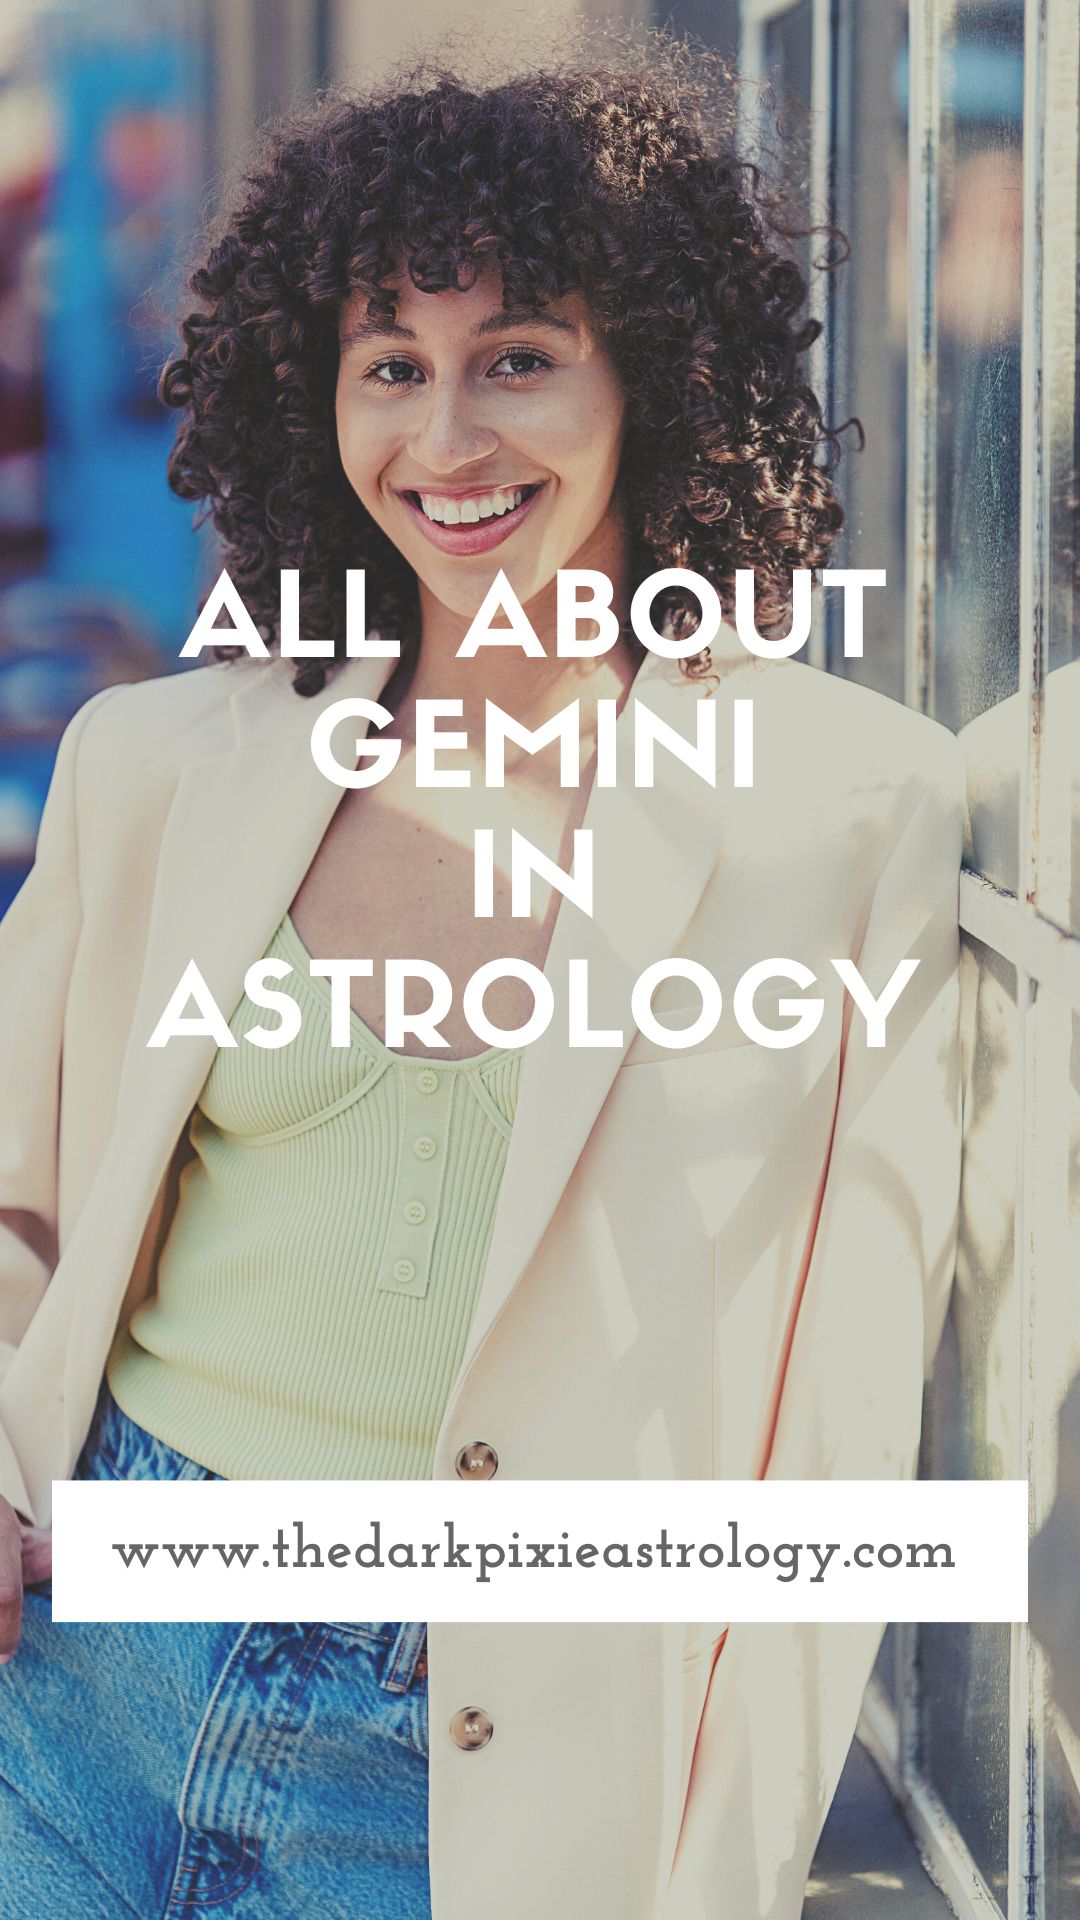 All About Gemini in Astrology - The Dark Pixie Astrology